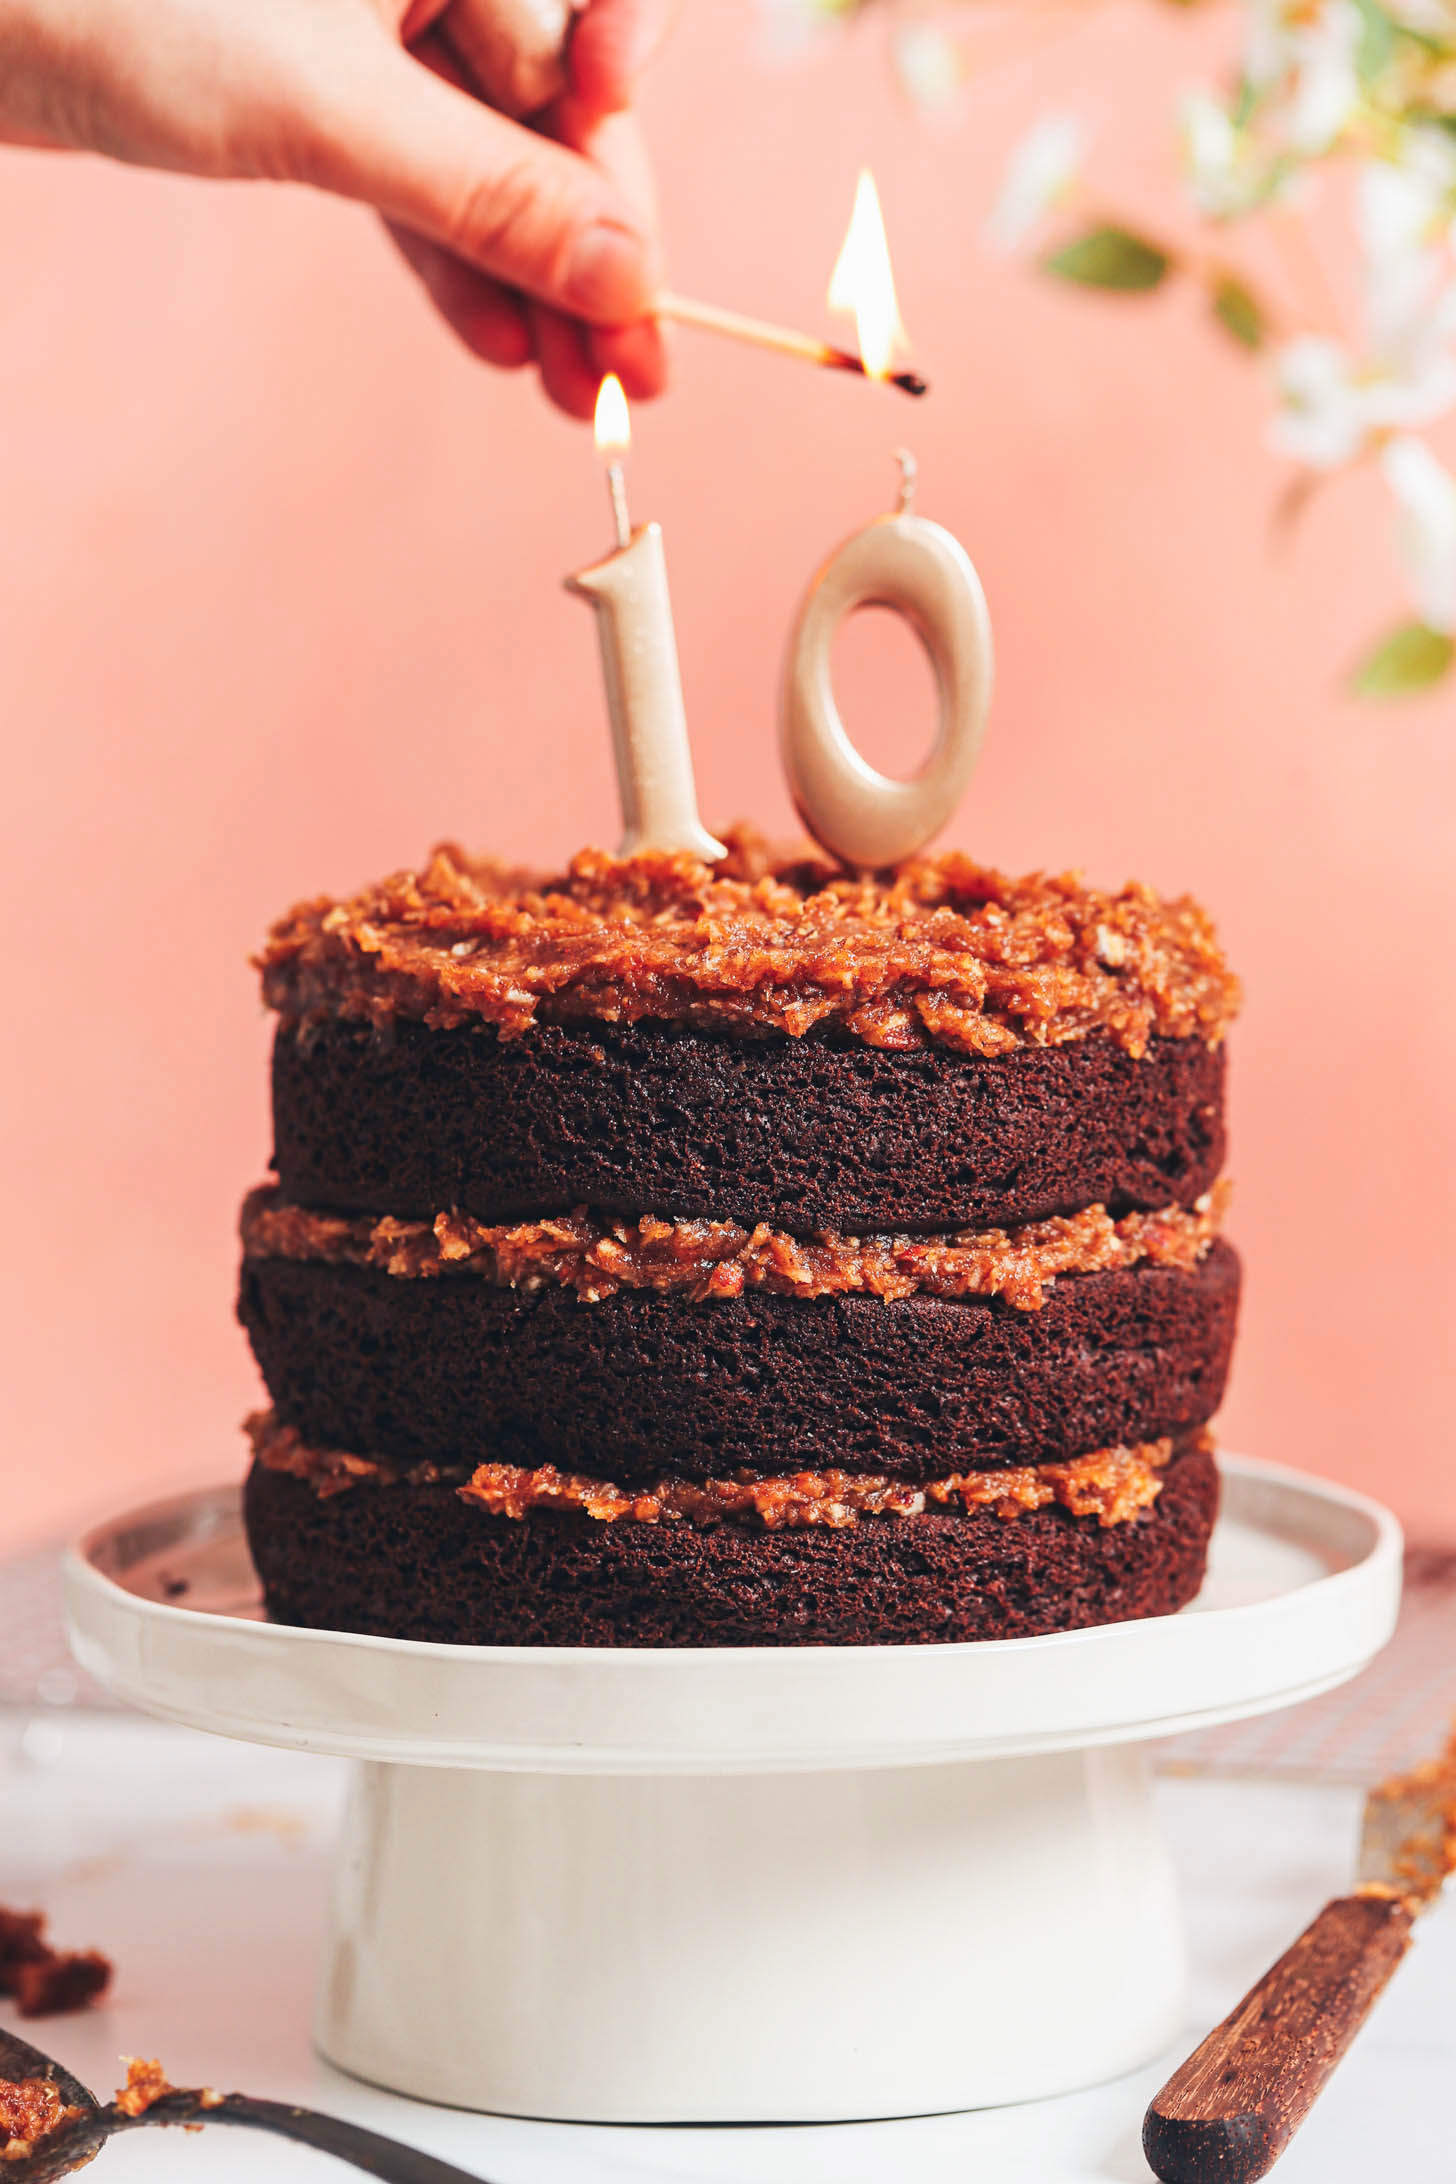 Lighting a candle on our vegan gluten-free German chocolate cake to celebrate our 10 years of blogging